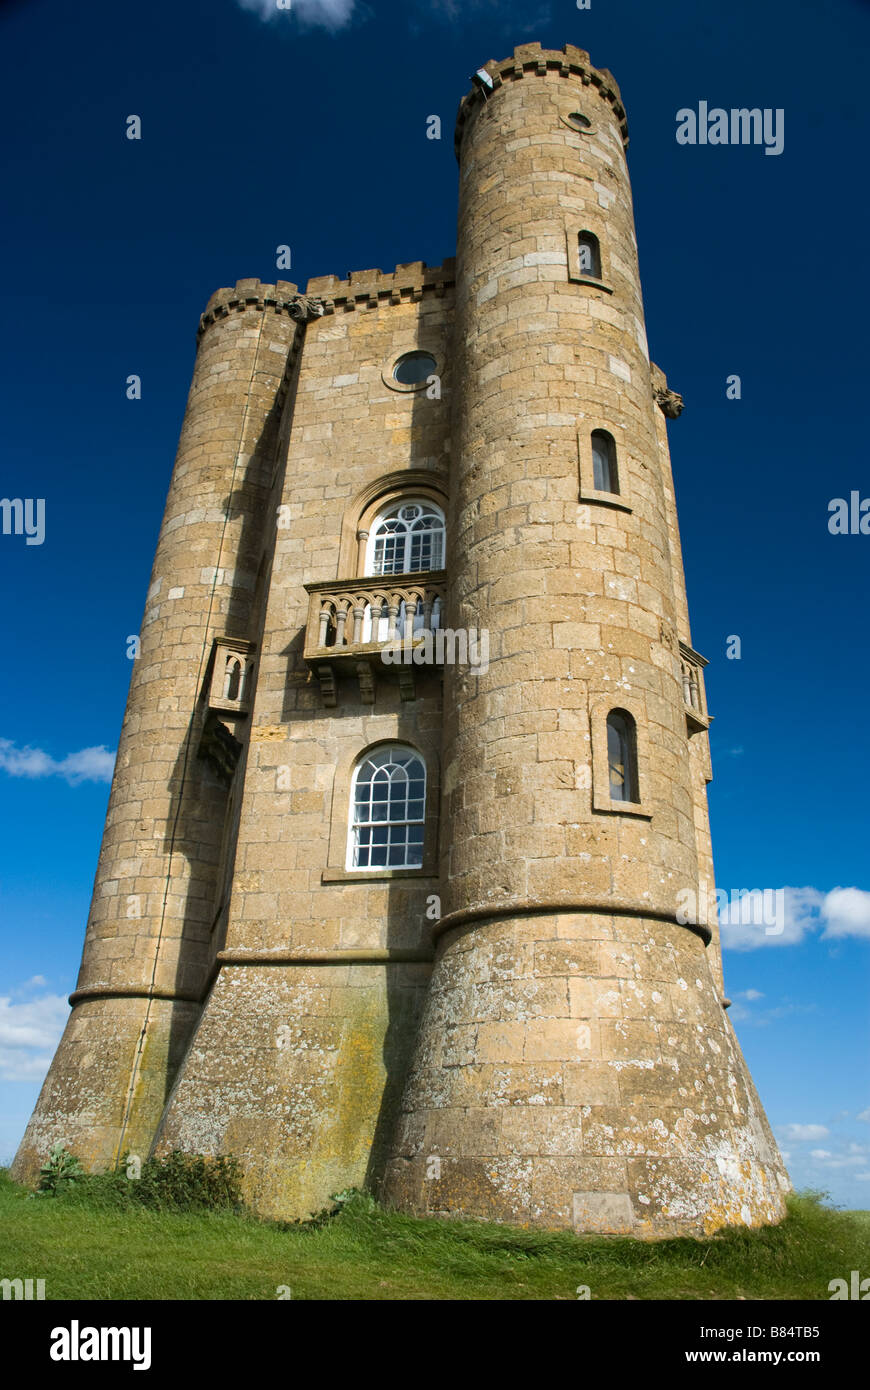 Broadway Tower The Cotswolds Worcestershire England UK Stock Photo